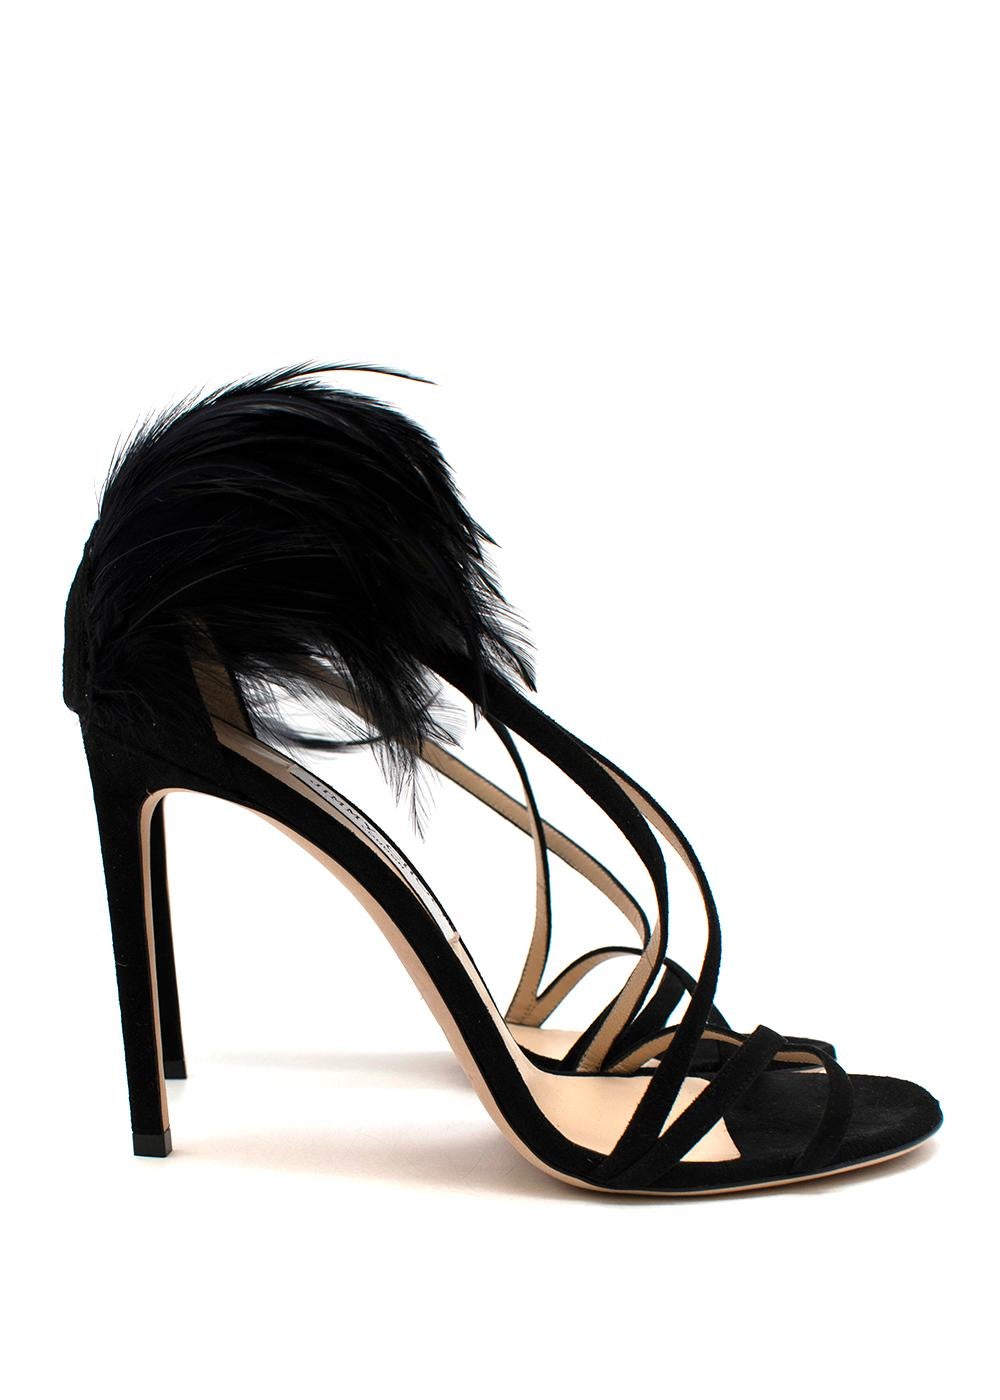 Jimmy Choo black suede feather trimmed Belissa 100 heeled sandals

- Strappy, black suede sandals with a feather-trimmed heel cuff
- Adjustable buckled ankle strap
- Set on a high stiletto heel 

Materials:
Suede and feather 

Made in Italy 

PLEASE